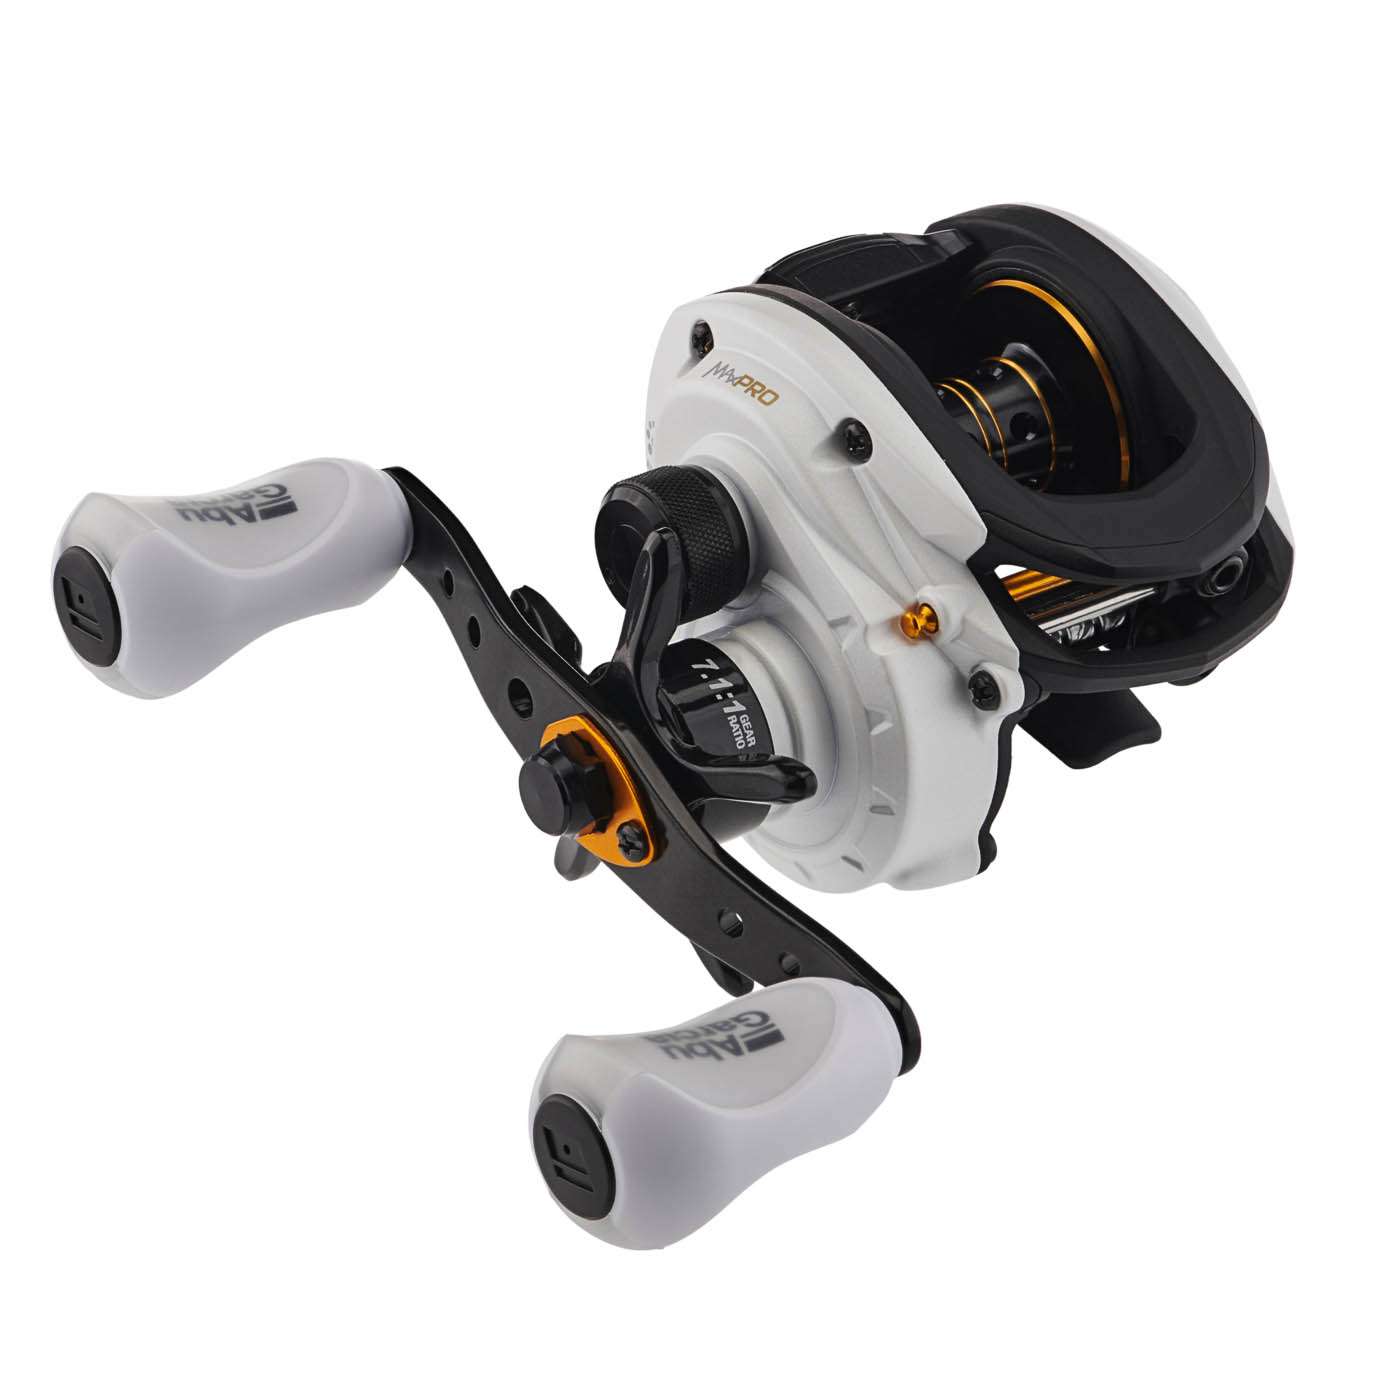 <p><strong>Abu Garcia MAX PRO Low Profile Reel</strong></p><p>Experience better-than-ever Abu Garcia engineering with MAXimum performance with the Abu Garcia Max Pro baitcast reels. Reels feature custom designed, co-molded handle knobs for increased comfort, a 7+1 bearing system for ultimate smoothness, and Duragear Brass gear for durability. $84.99. <a href=